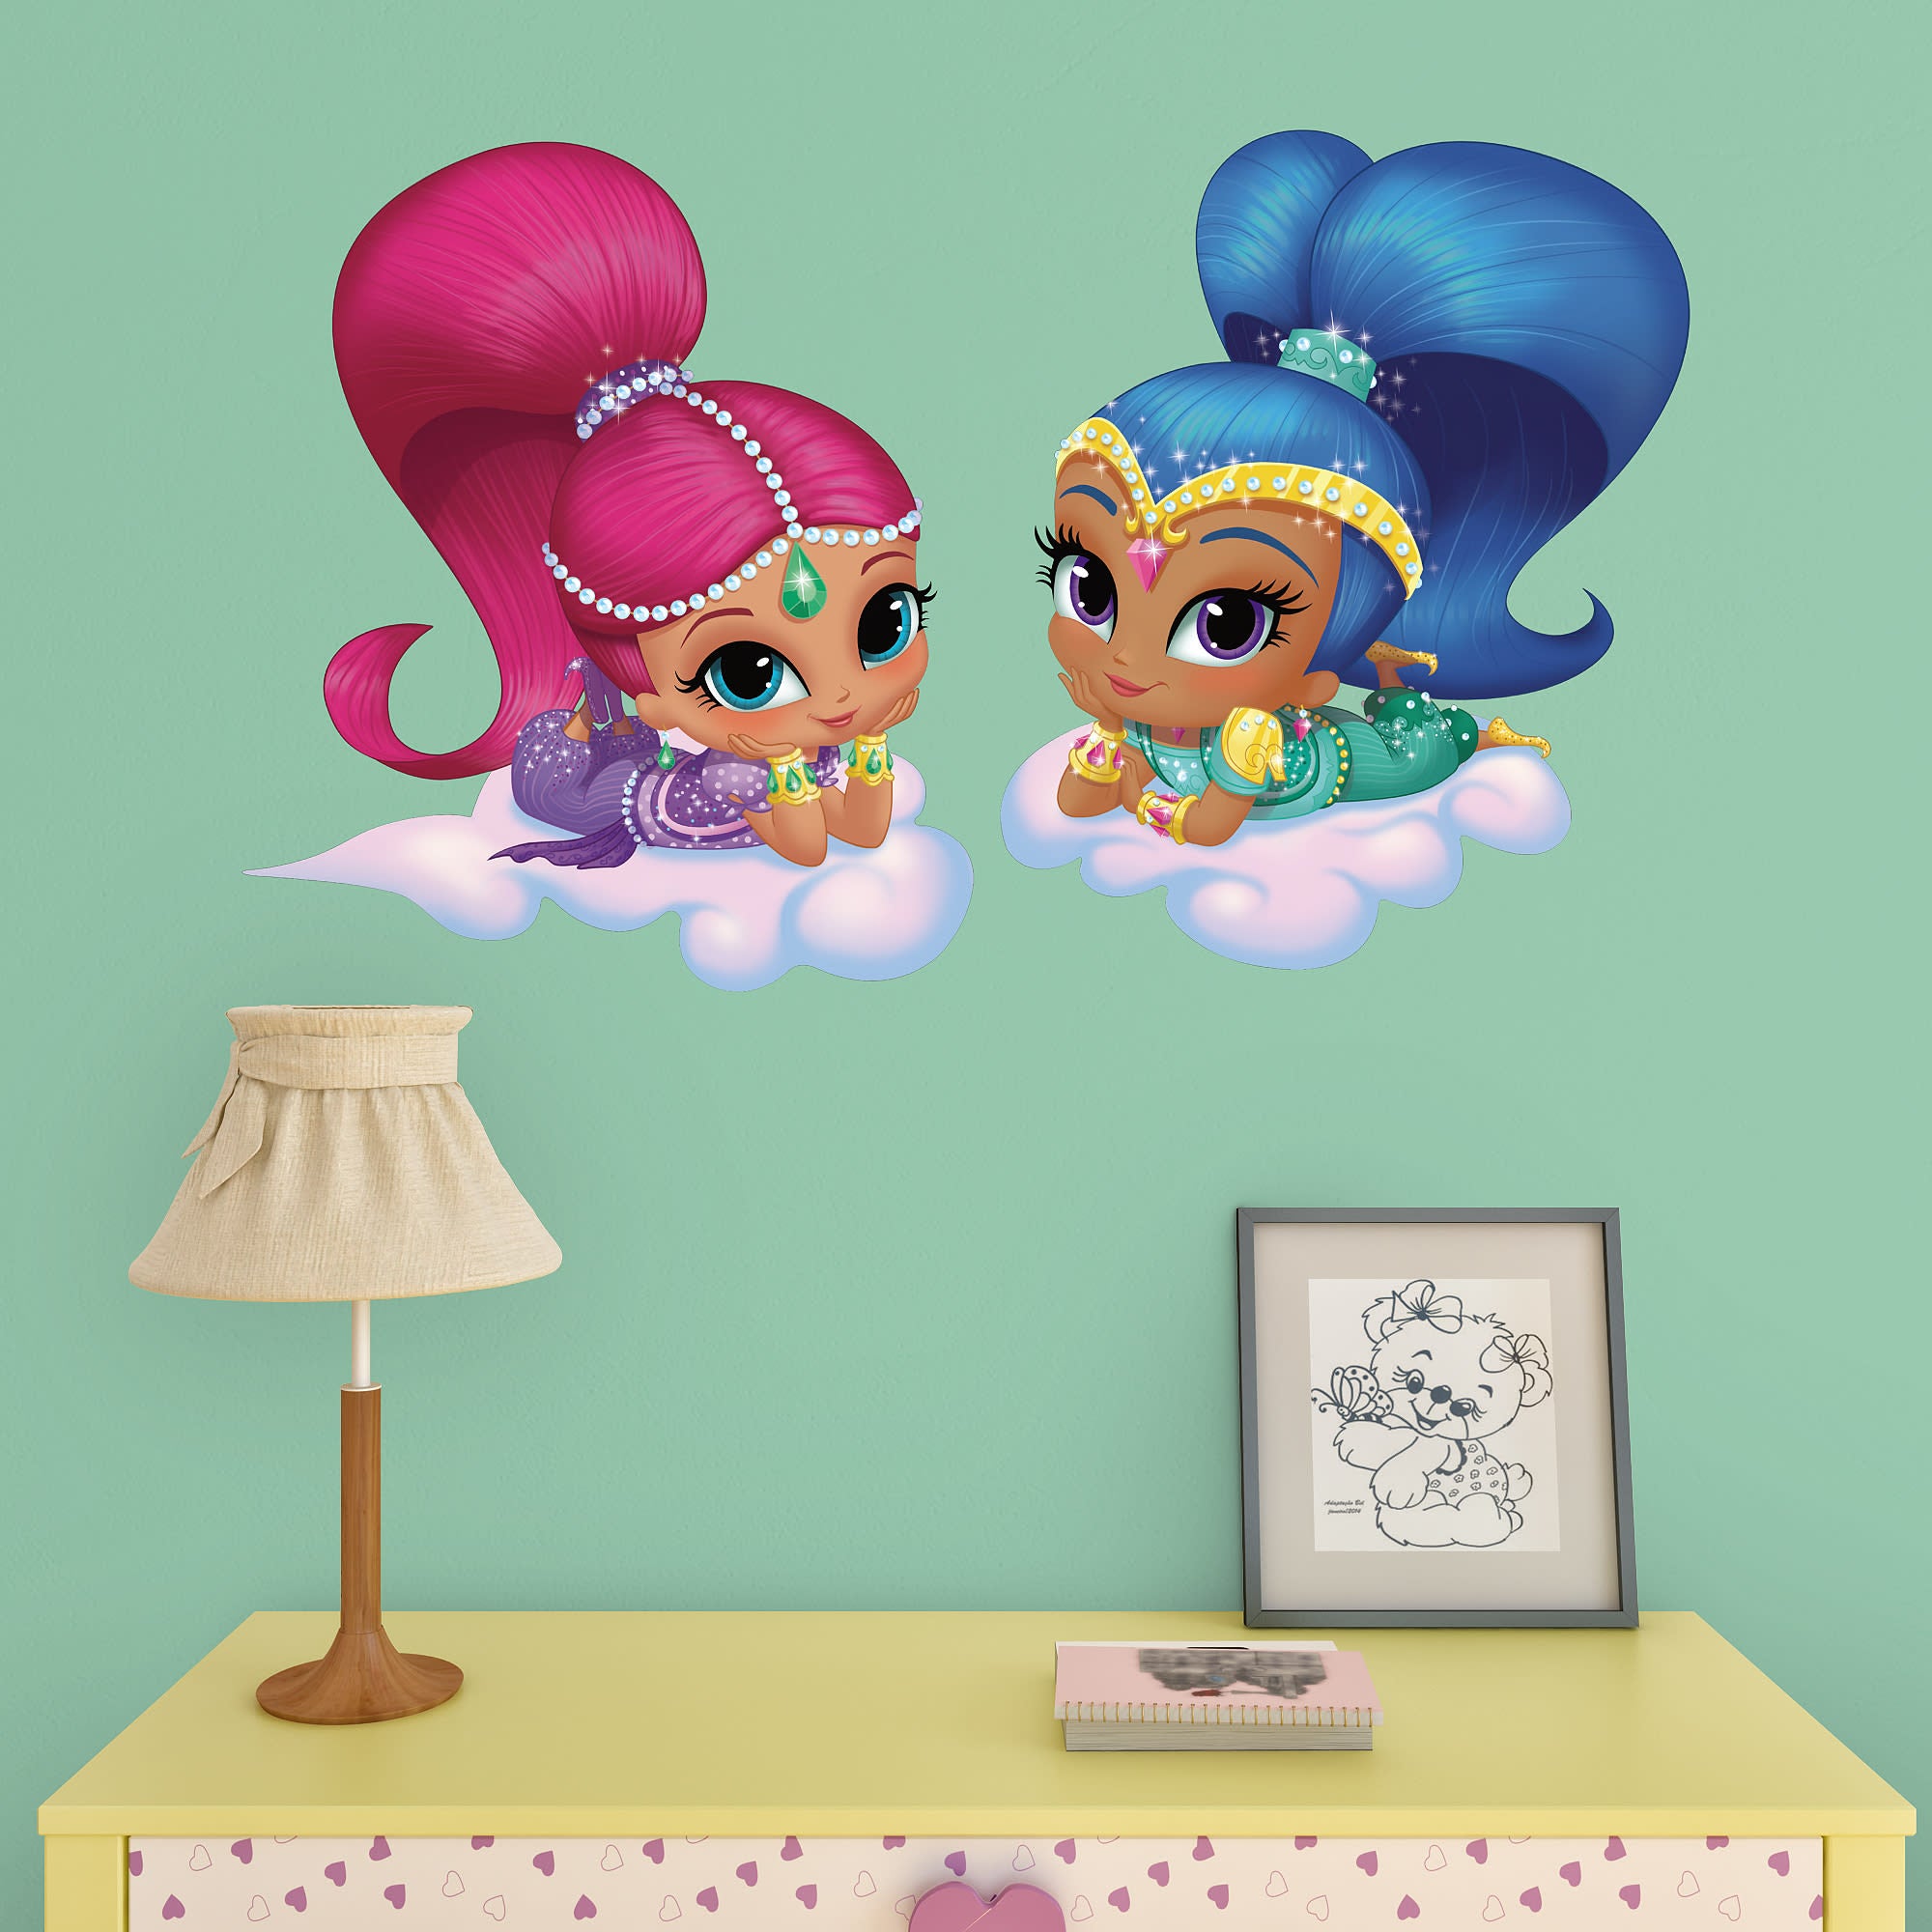 Shimmer and Shine - Officially Licensed Removable Wall Decals 24.0"W x 21.0"H by Fathead | Vinyl